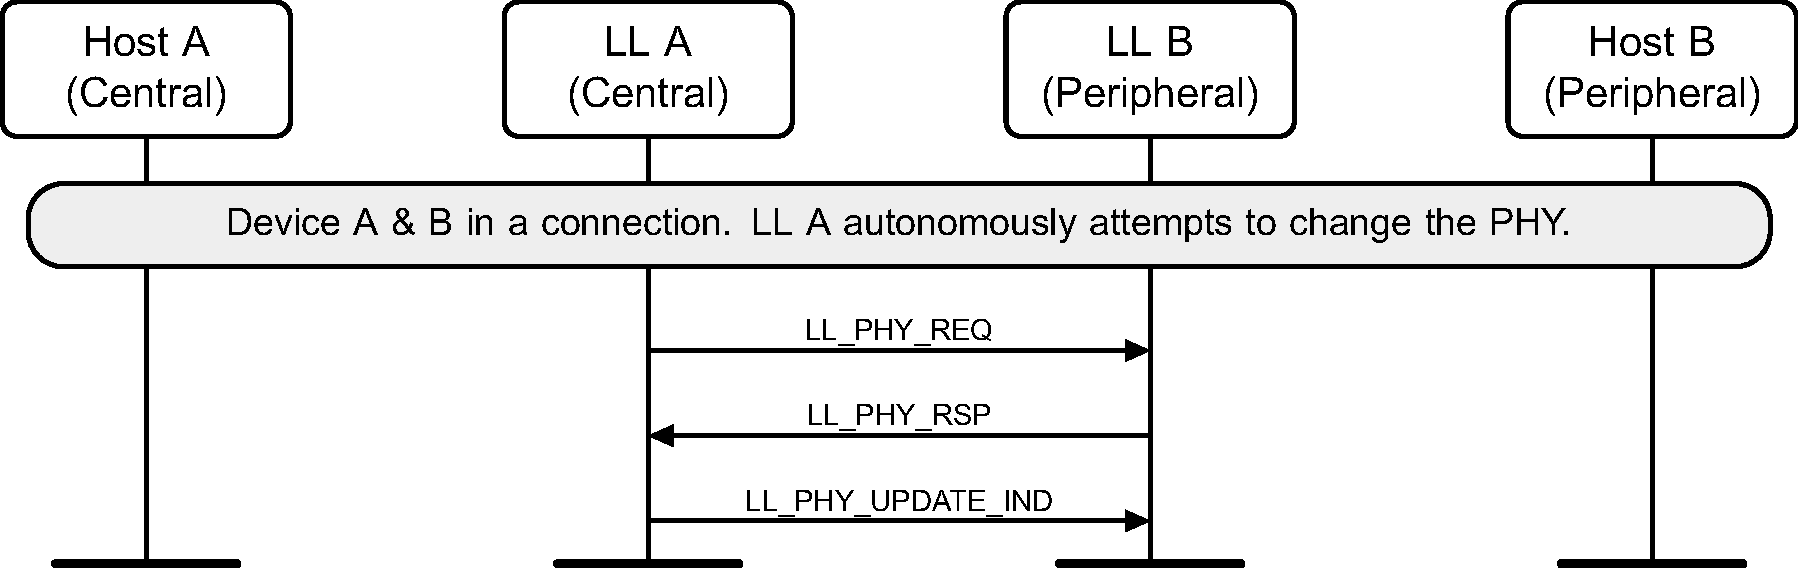 Autonomous Central-initiated PHY Update procedure – Central requests a change of PHY, PHY not changed (either because Peripheral doesn't specify PHYs that the Central prefers, or because the Central concludes that the current PHYs are still best)